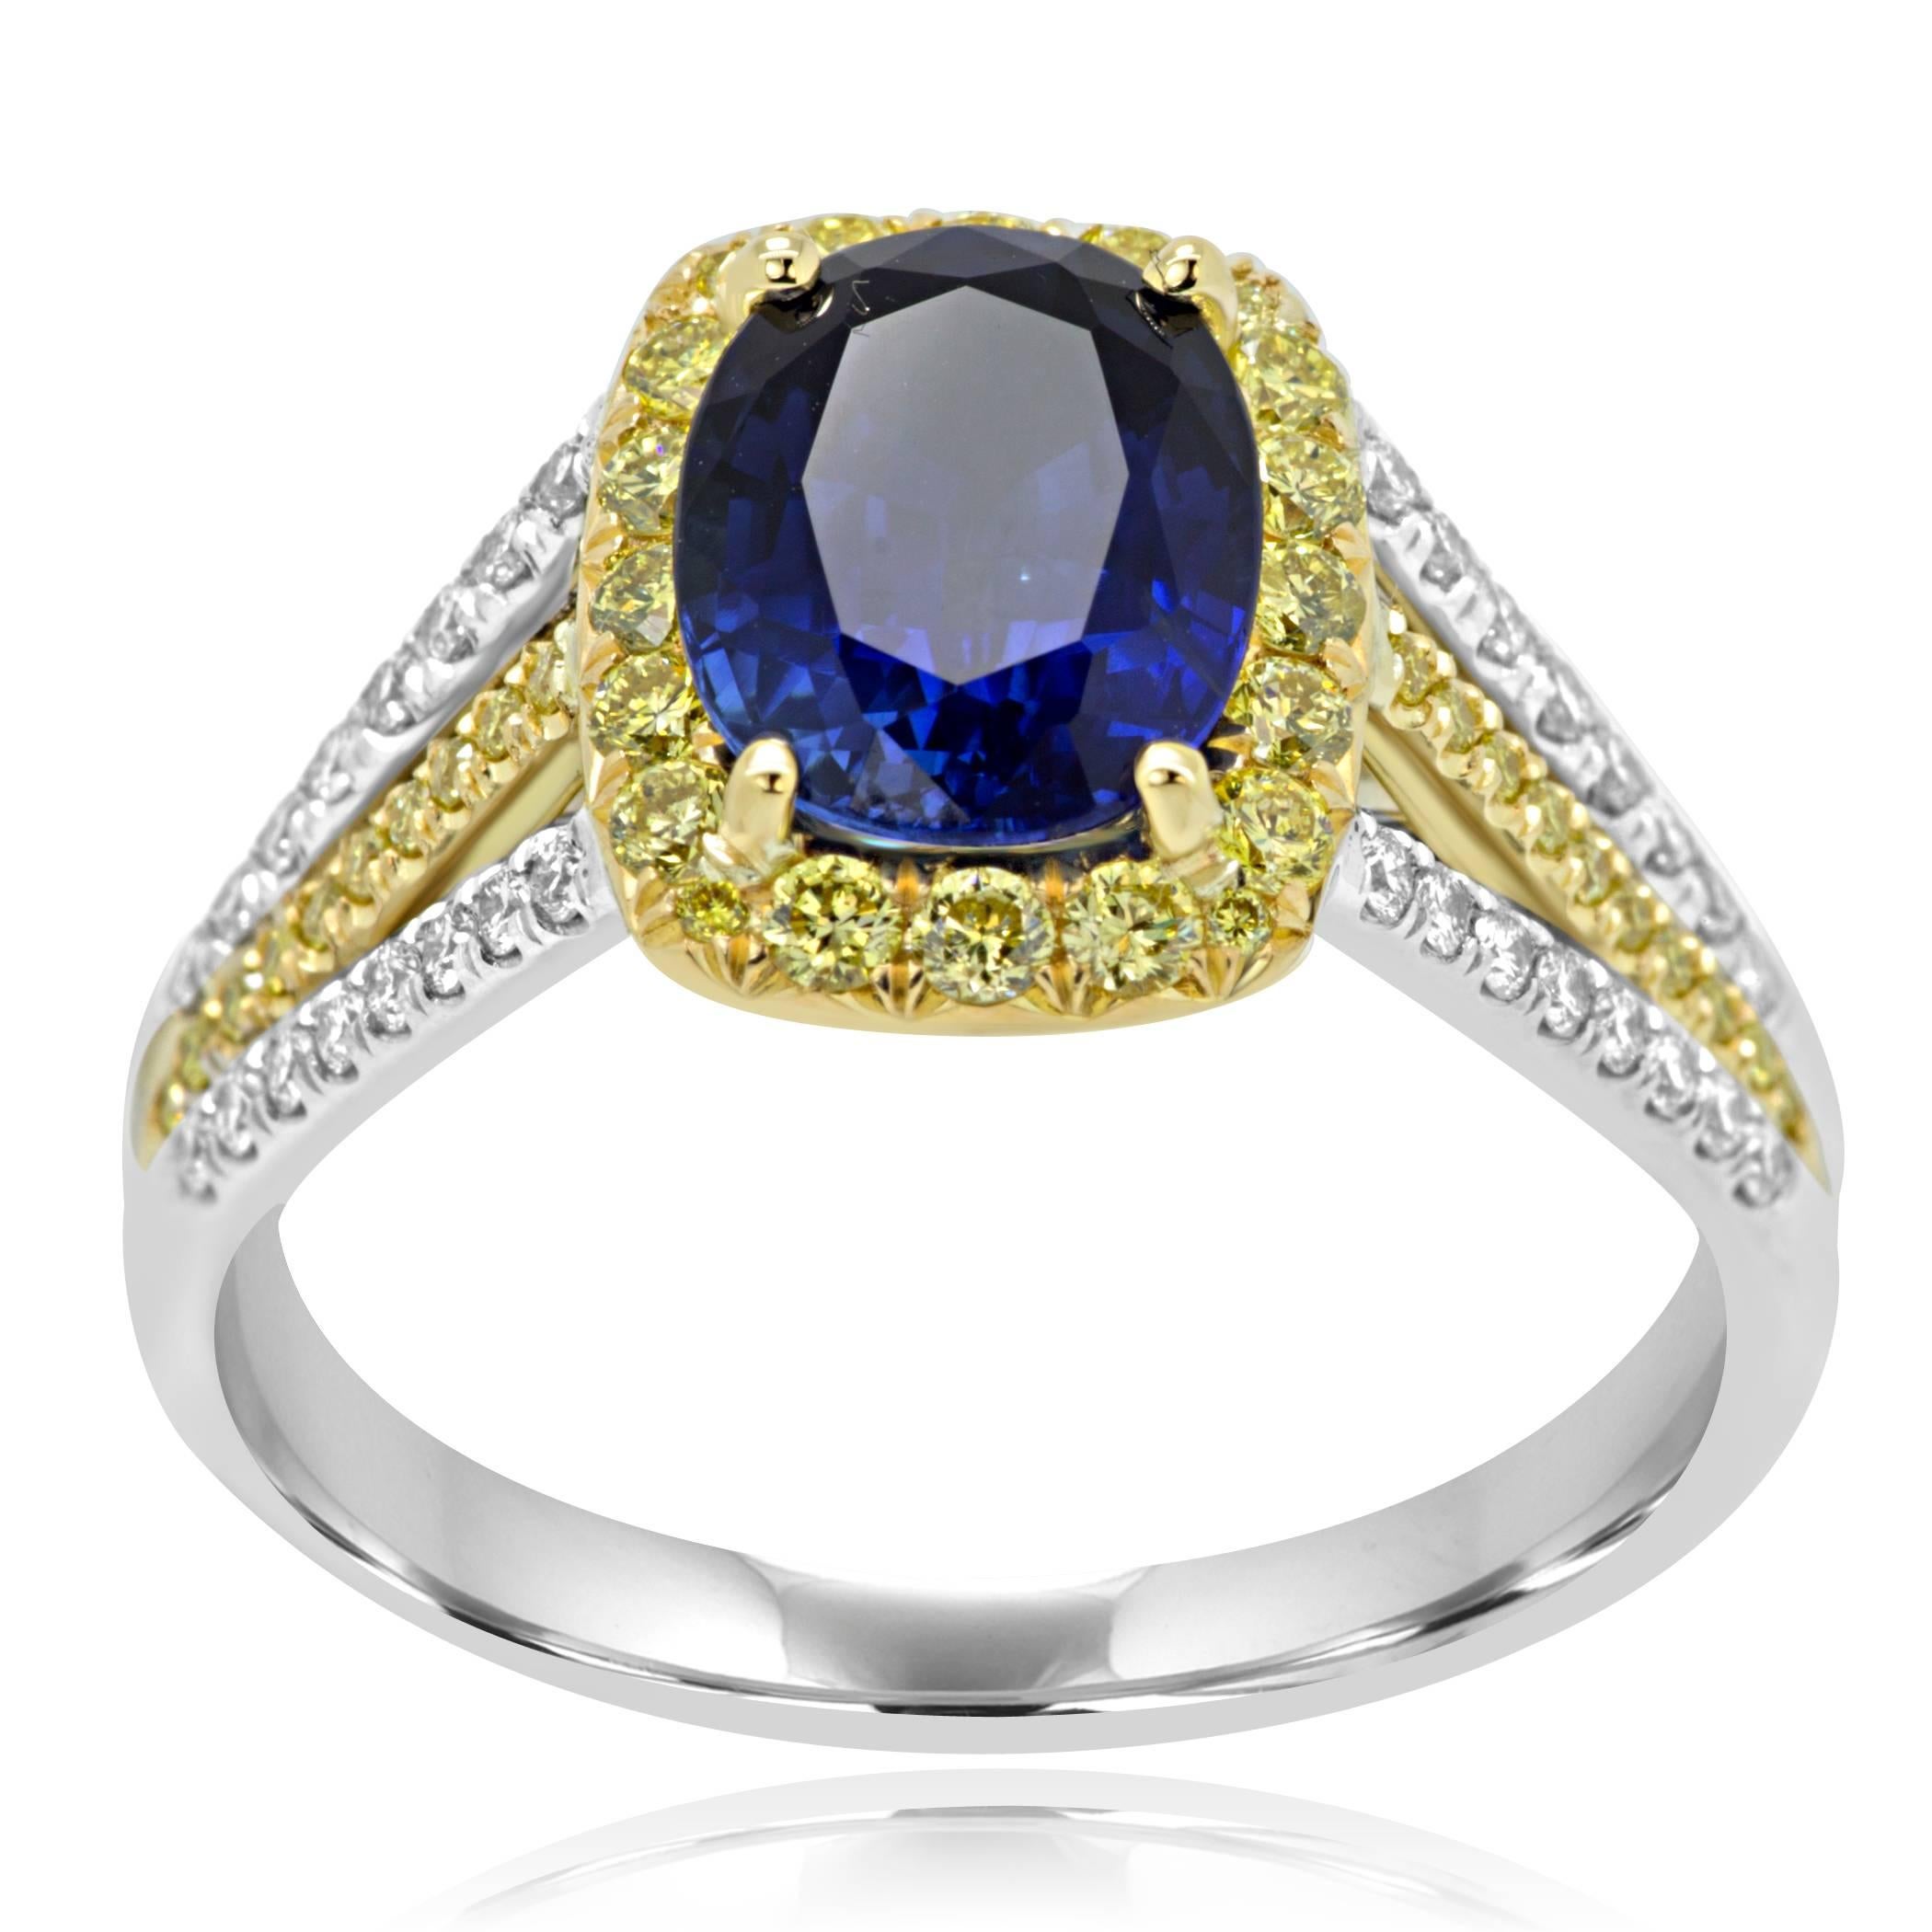 Blue Sapphire oval 2.25 Carat Encircled in a Halo of Natural Fancy Yellow Diamonds 0.36 Carat with White Diamond Rounds 0.21 Carat on the Shank in 18K White and Yellow Gold Ring.

Style available in different price ranges. Prices are based on your